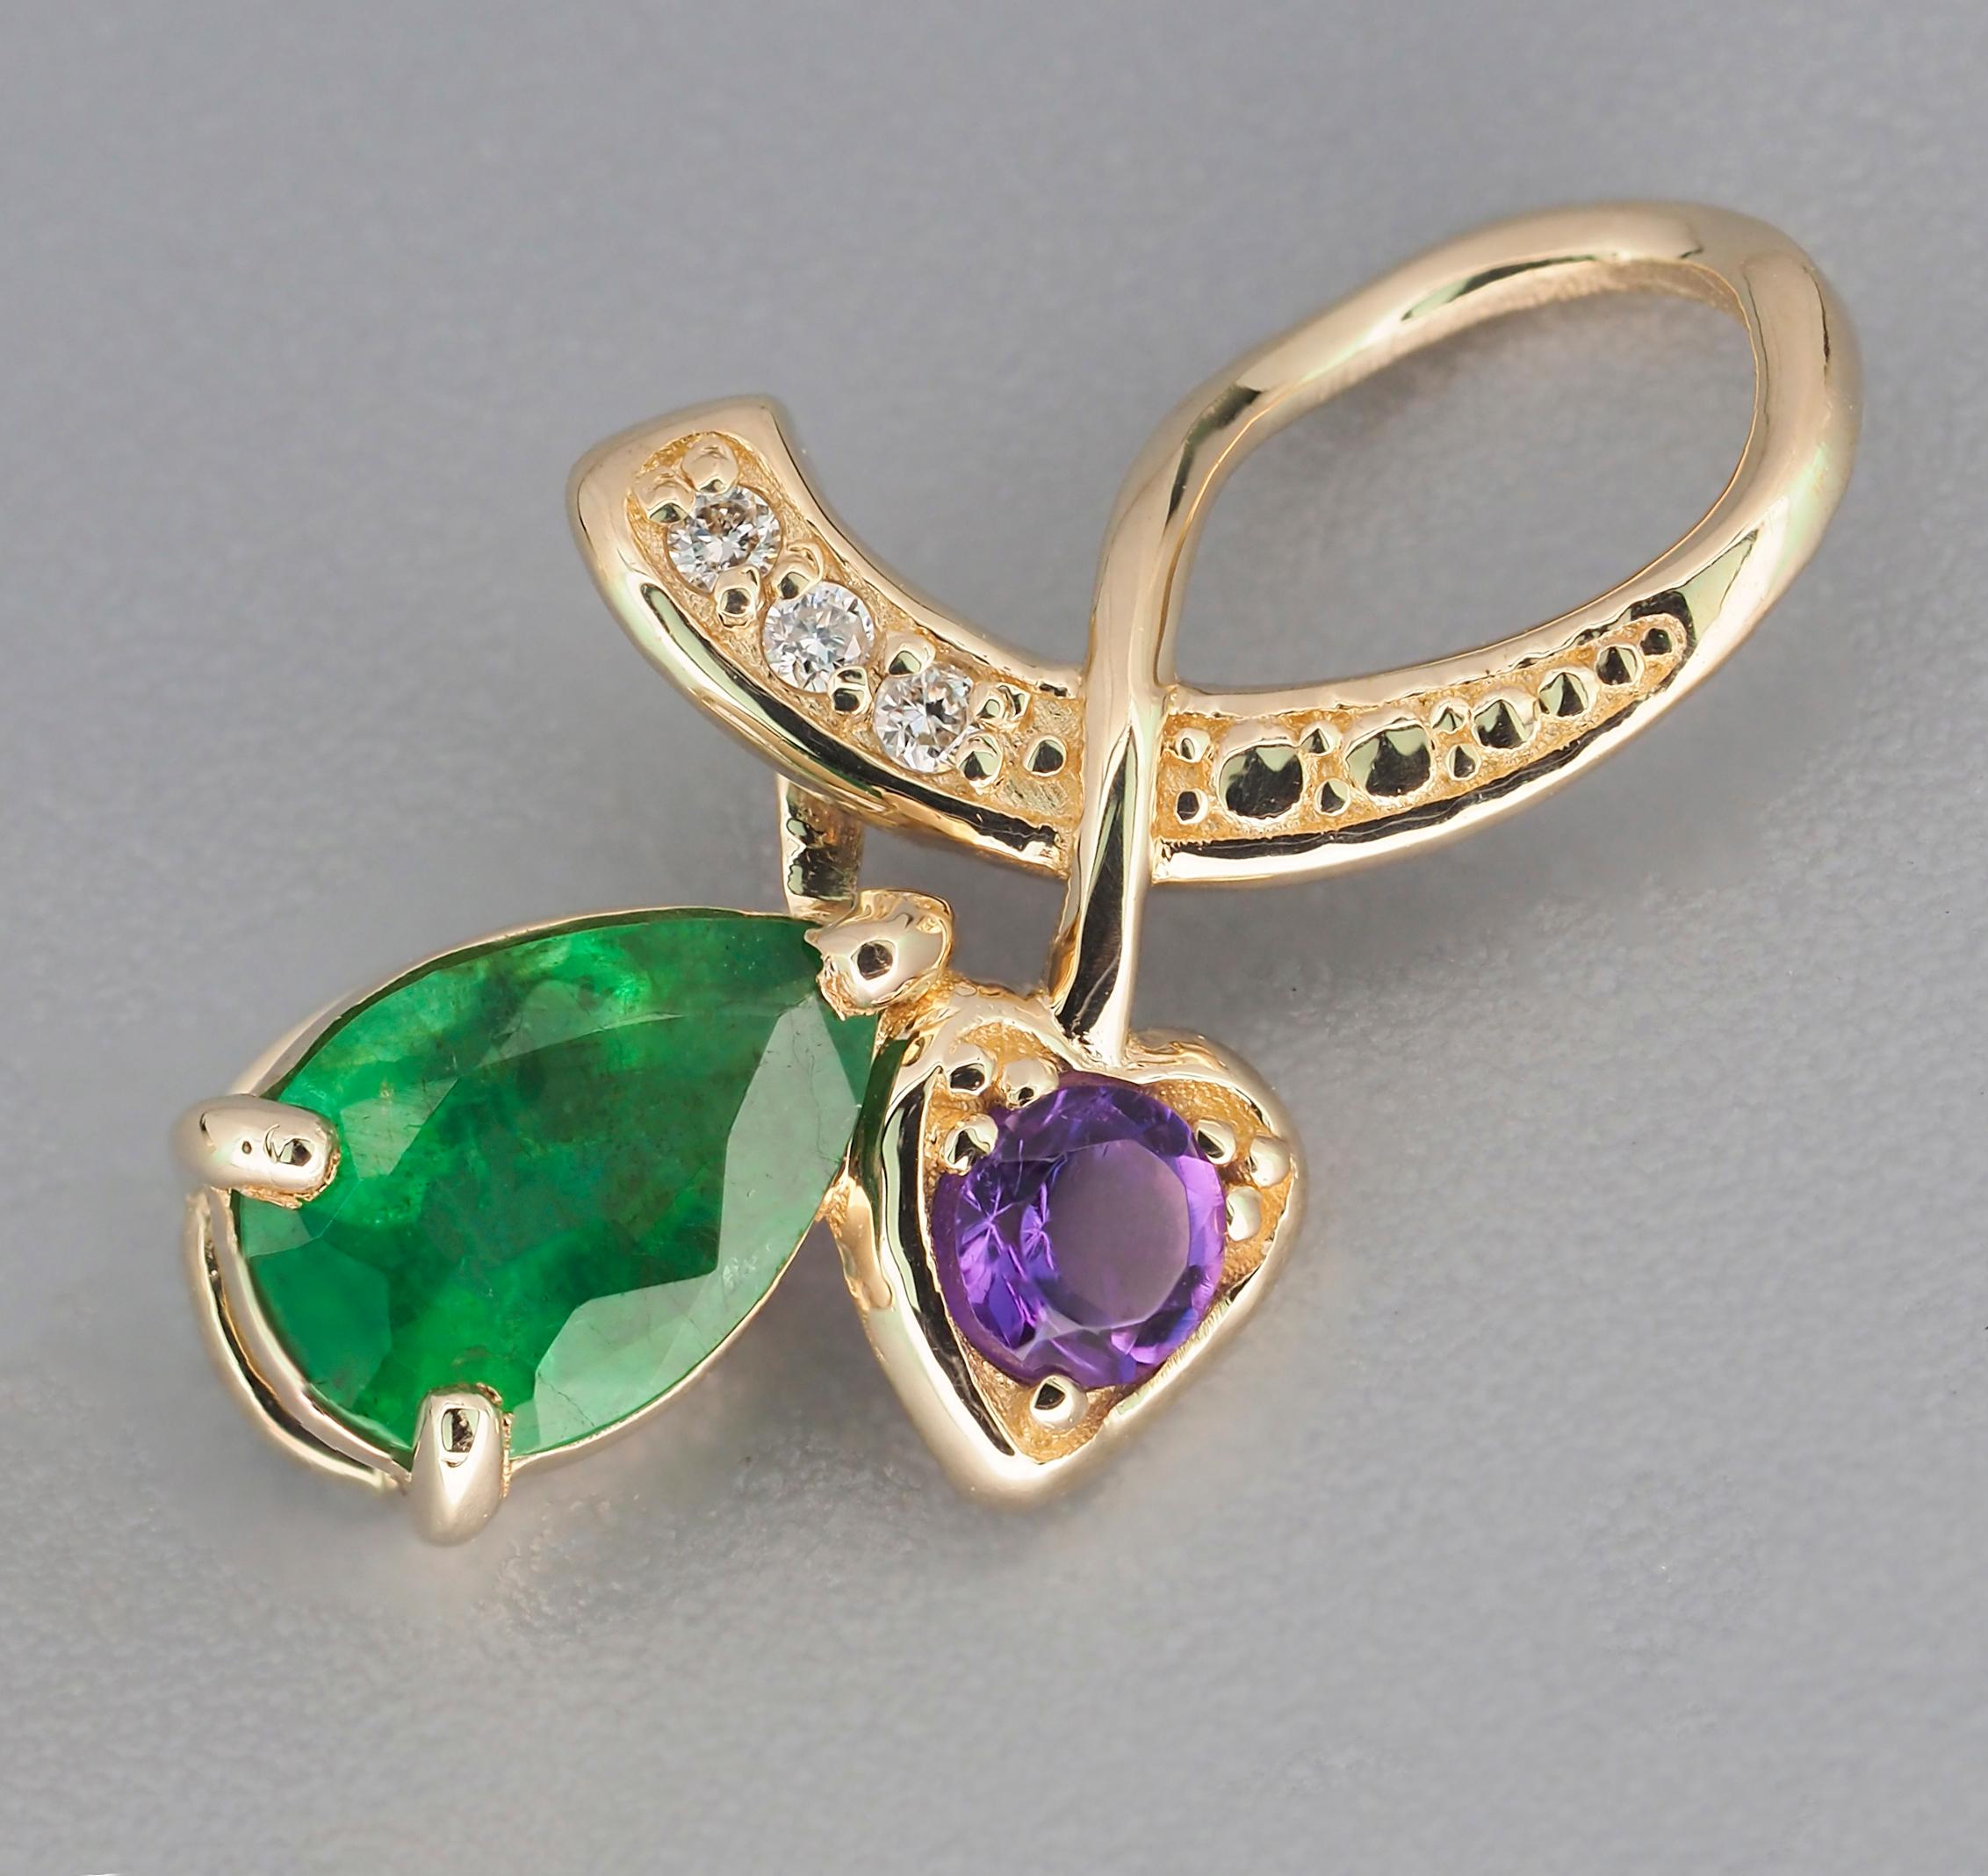 Gold Leaf pendant with Emerald. 
Emerald, amethyst, diamonds 14k gold pendant. Teardrop Emerald Pendant. Simple, everyday emerald pendant.

Weight: 0.8 g.
Metal - 14k gold
Pendant size in mm - 16.4x9.5 mm.

Central stone: Emerald
Cut: pear
Weight: